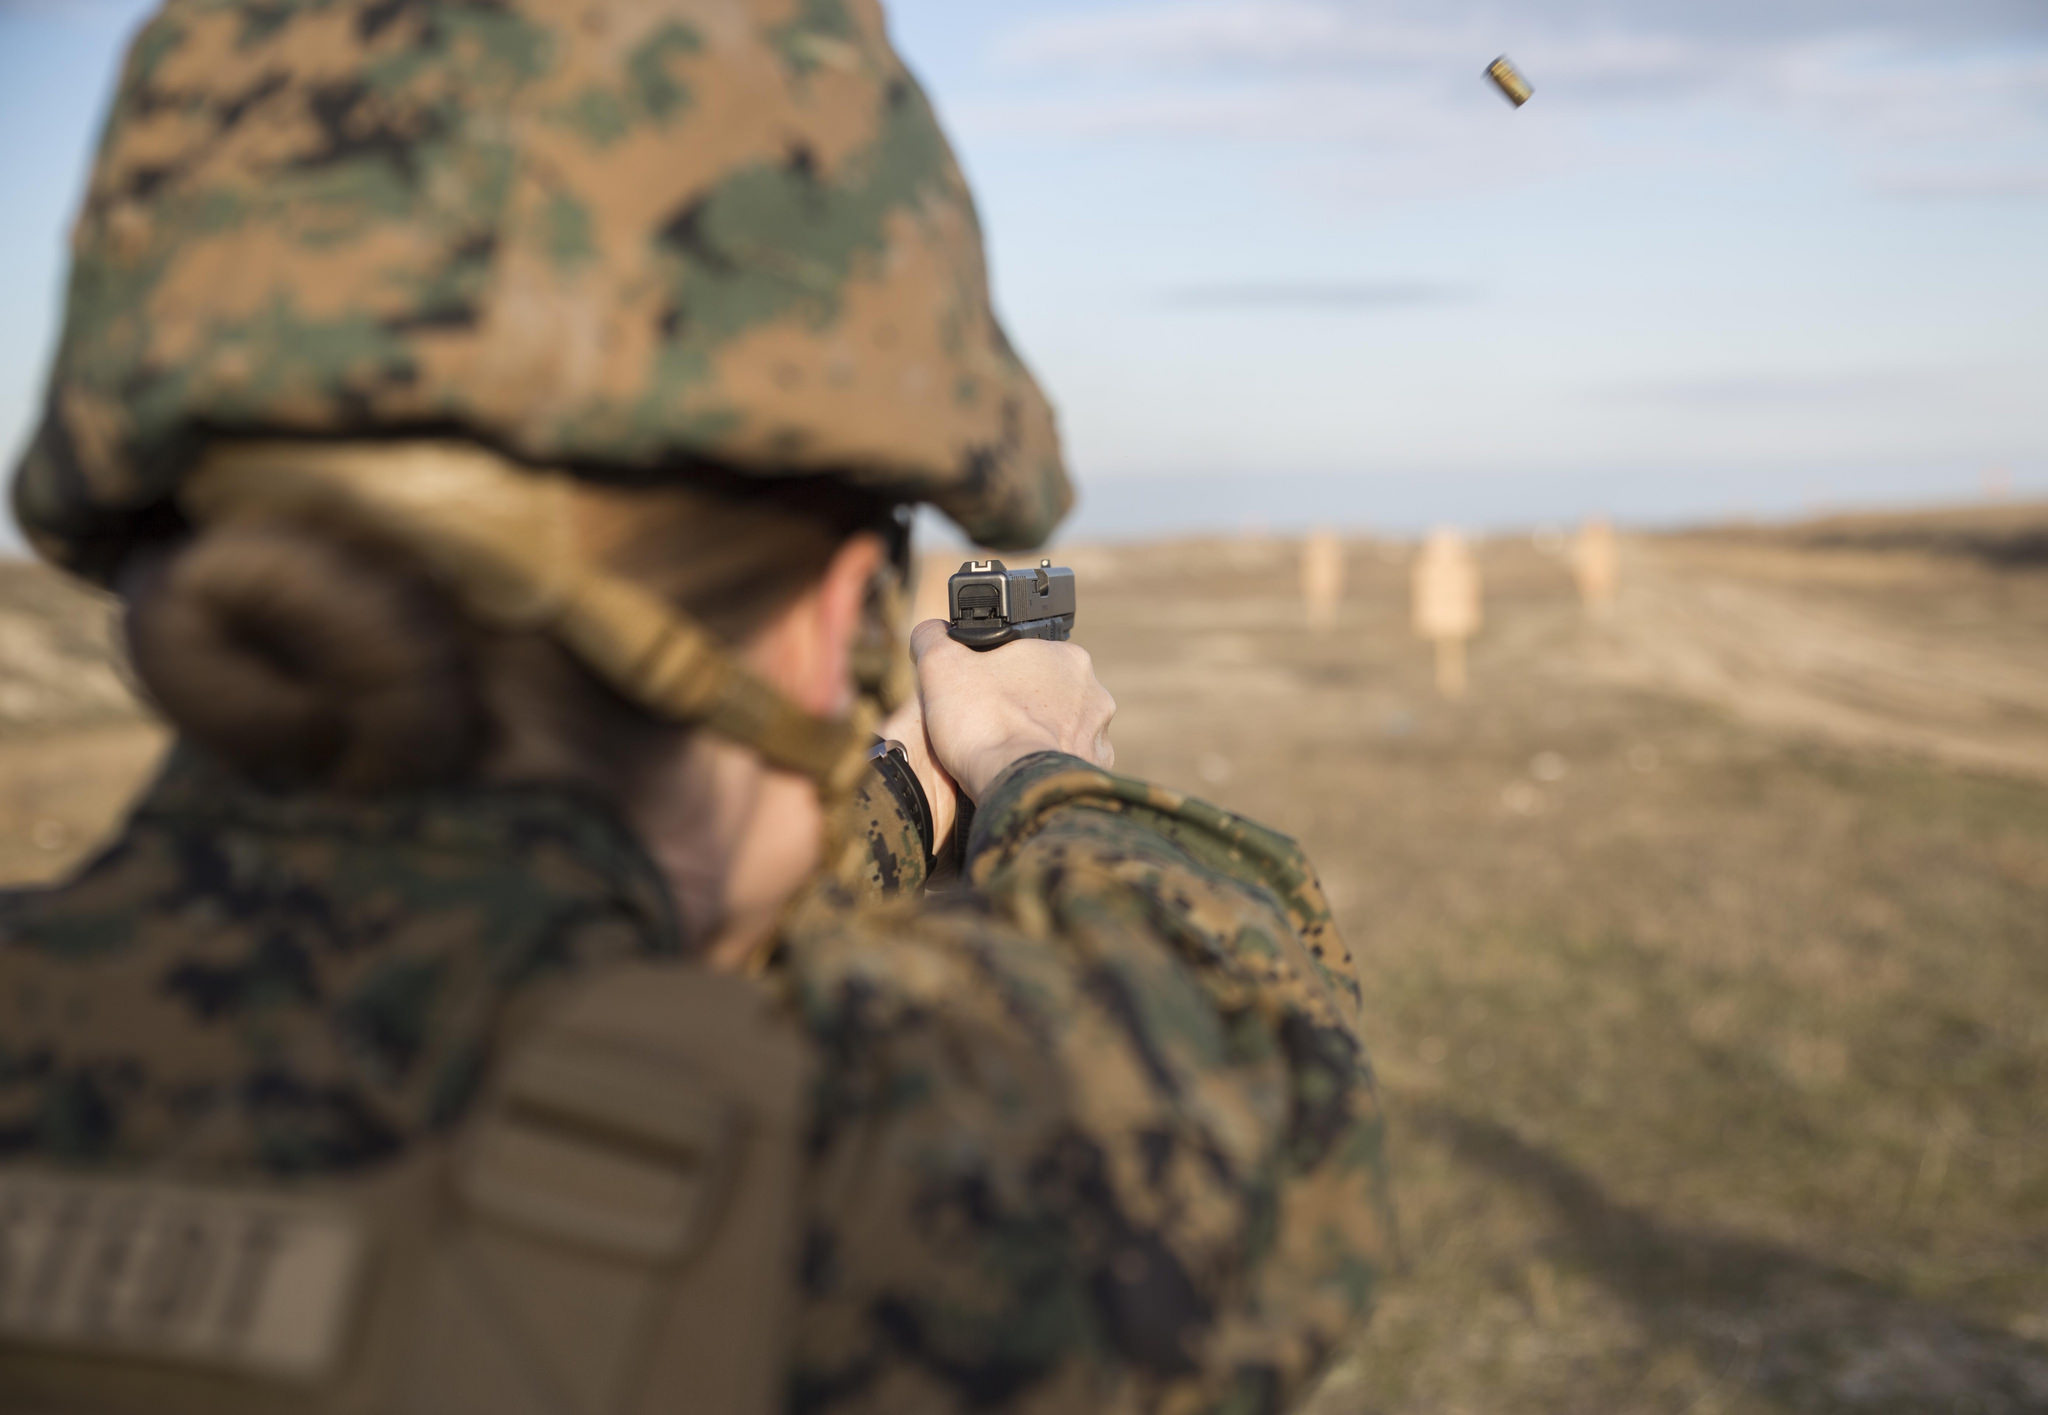 "A U.S. Marine, assigned to the 24th Marine Expeditionary Unit (MEU), Female Engagement Team, fires a Romanian troop’s pistol during a live-fire exercise at Capu Midia training grounds in Romania." 